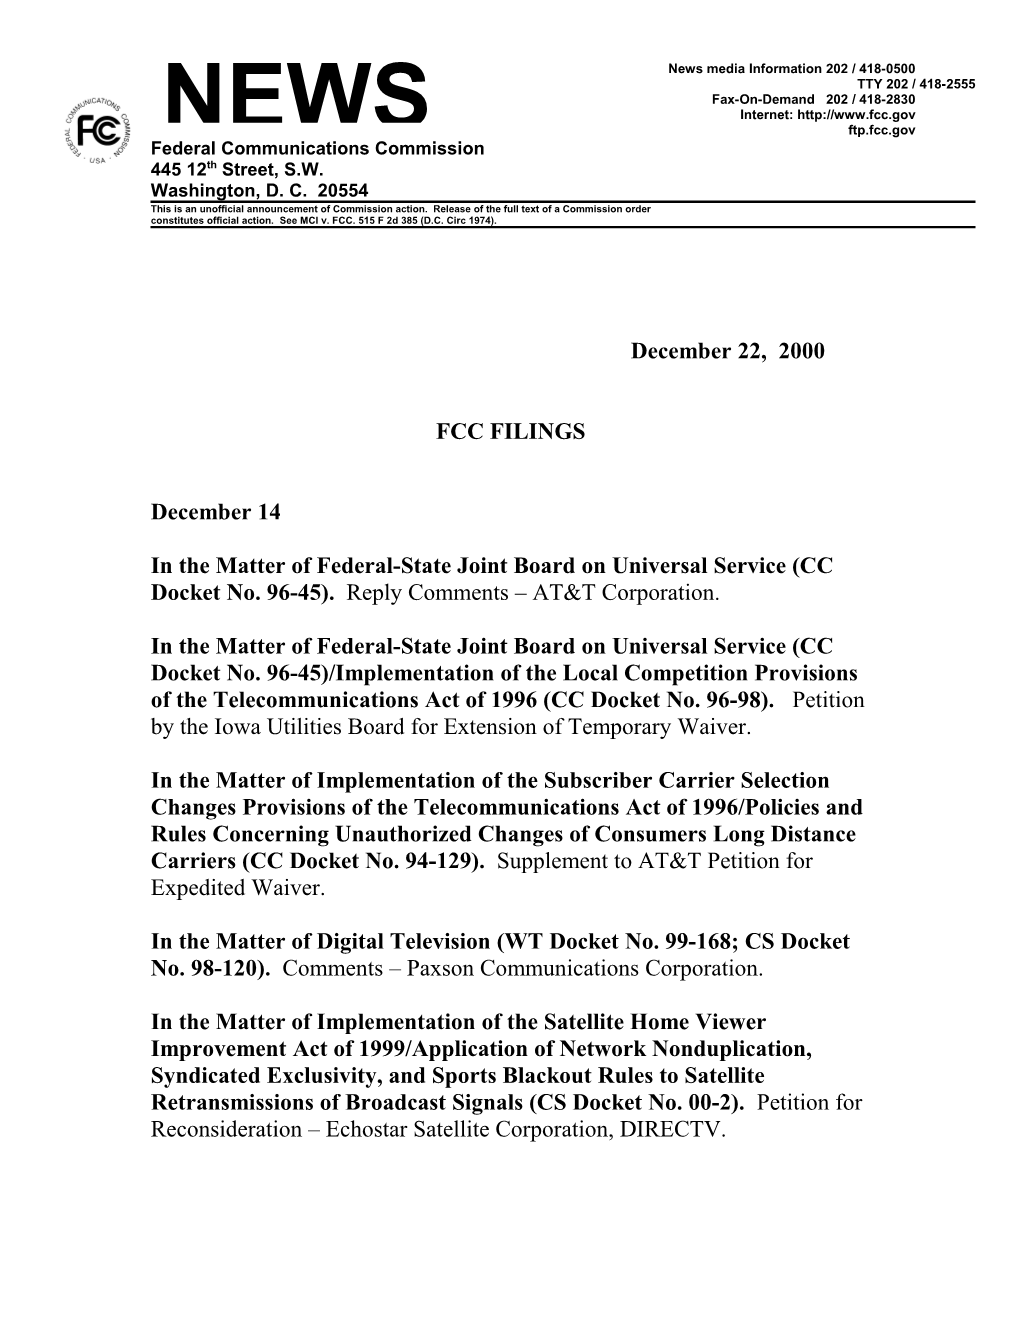 In the Matter of Federal-State Joint Board on Universal Service (CC Docket No. 96-45)